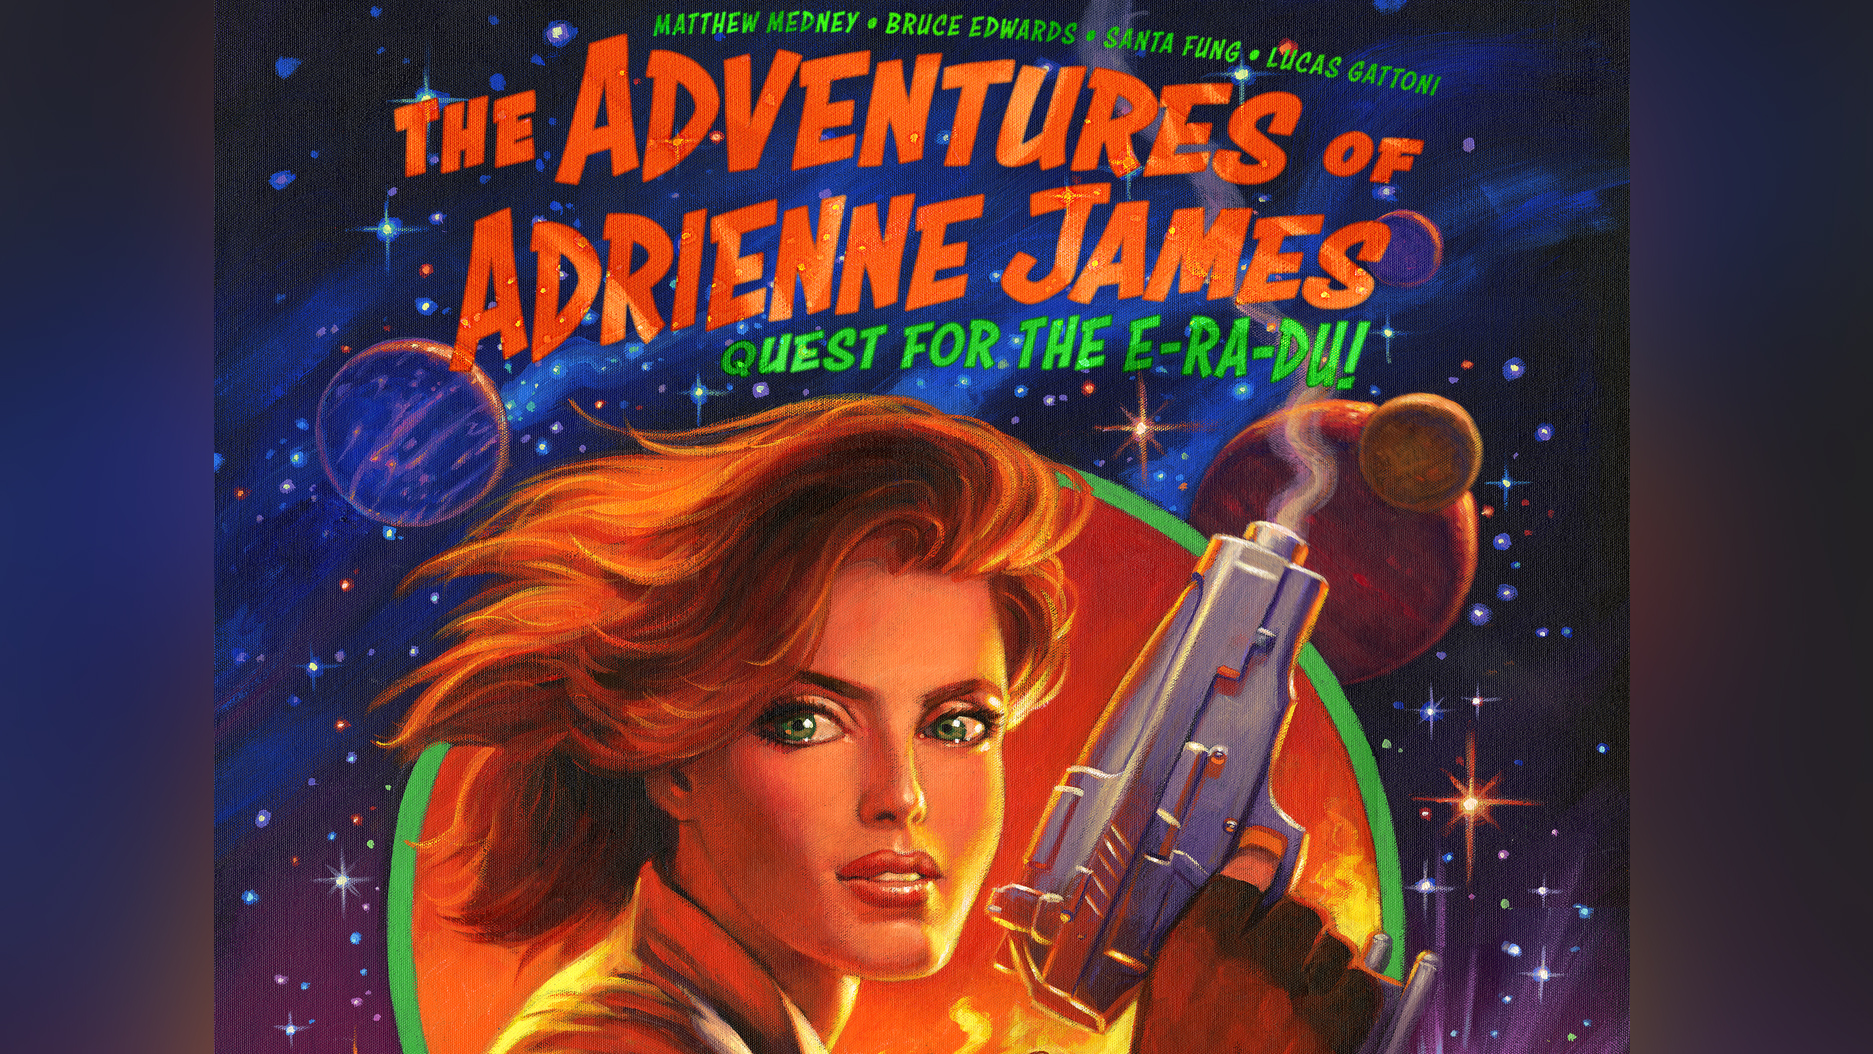 Exclusive Q&A: Heavy Metal CEO Matt Medney on his colorful new sci-fi comic book series 'The Adventures of Adrienne James' thumbnail